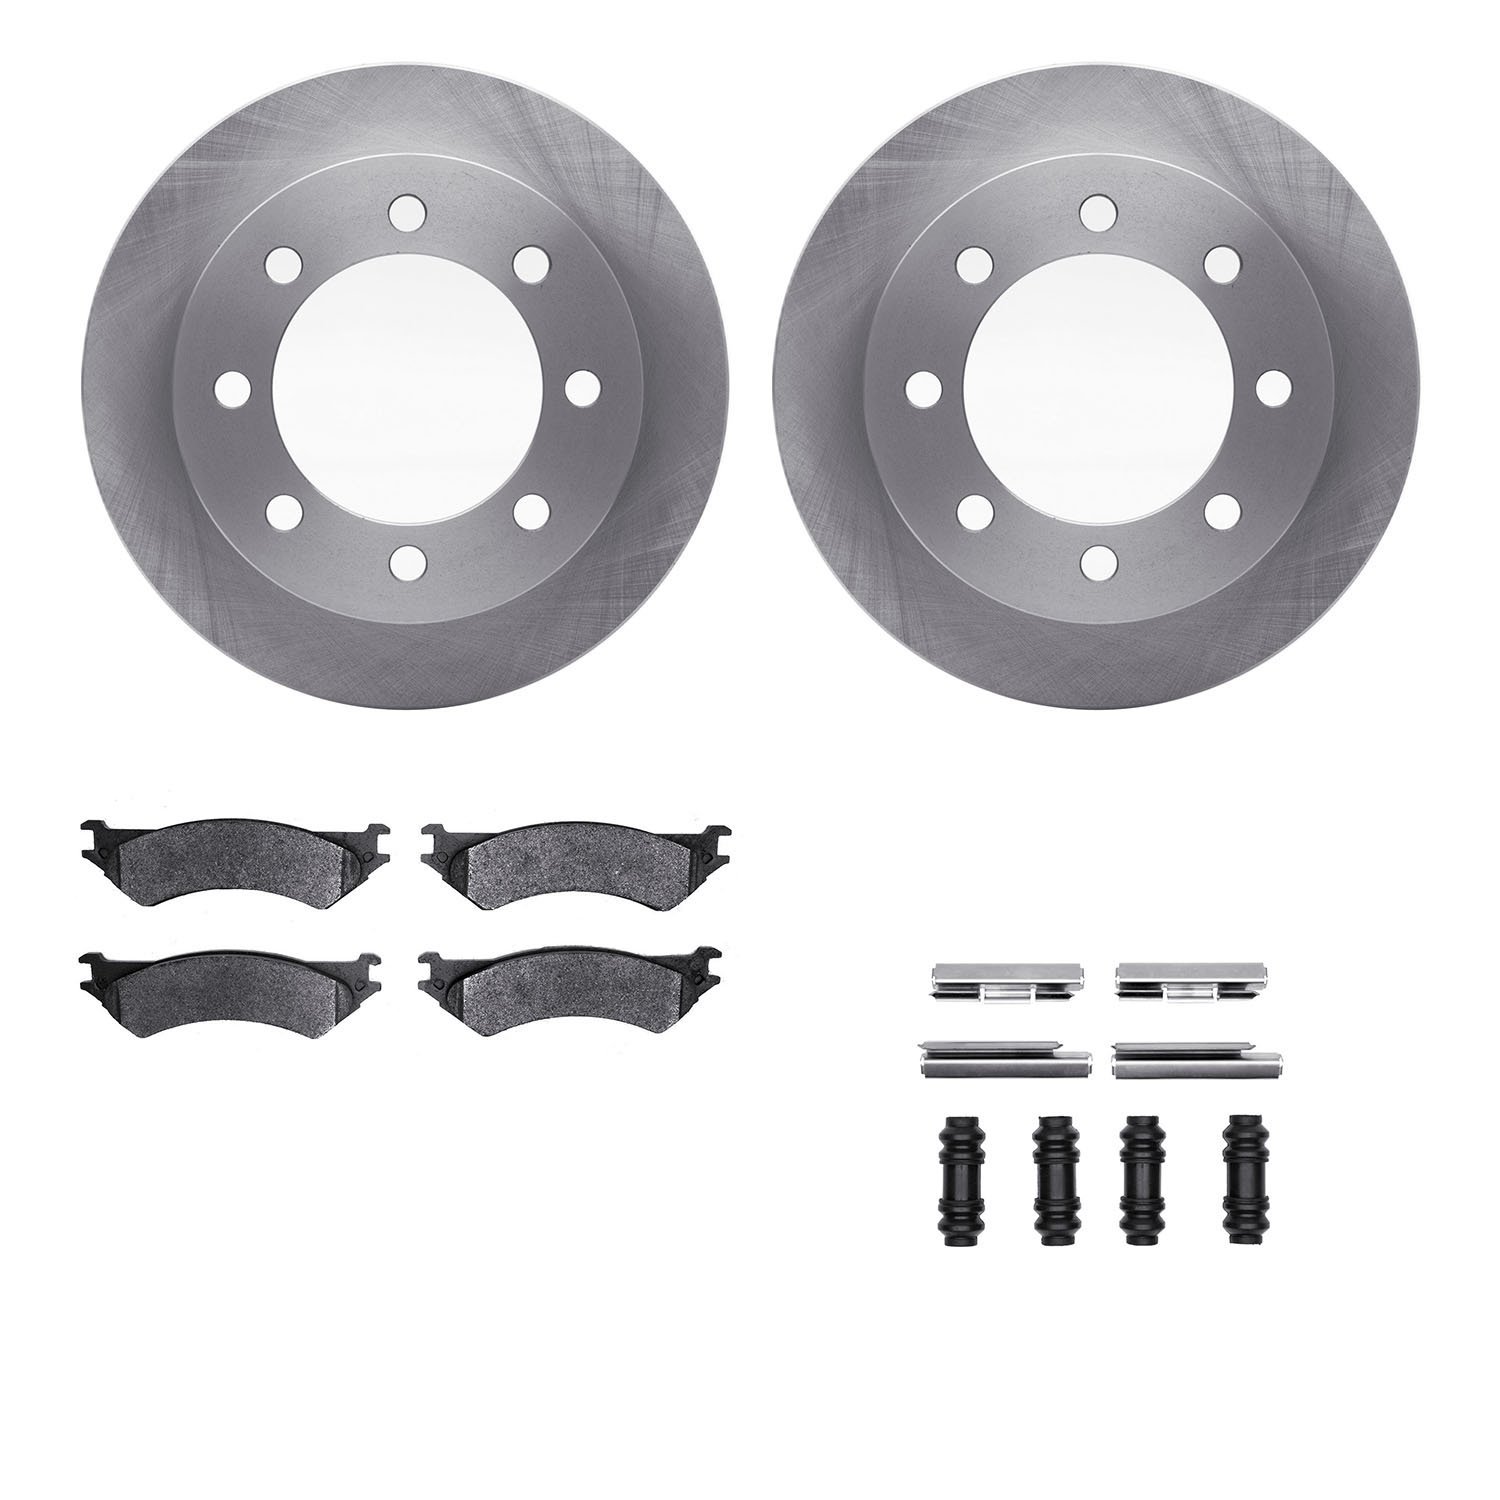 6412-54158 Brake Rotors with Ultimate-Duty Brake Pads Kit & Hardware, 1999-2007 Ford/Lincoln/Mercury/Mazda, Position: Rear